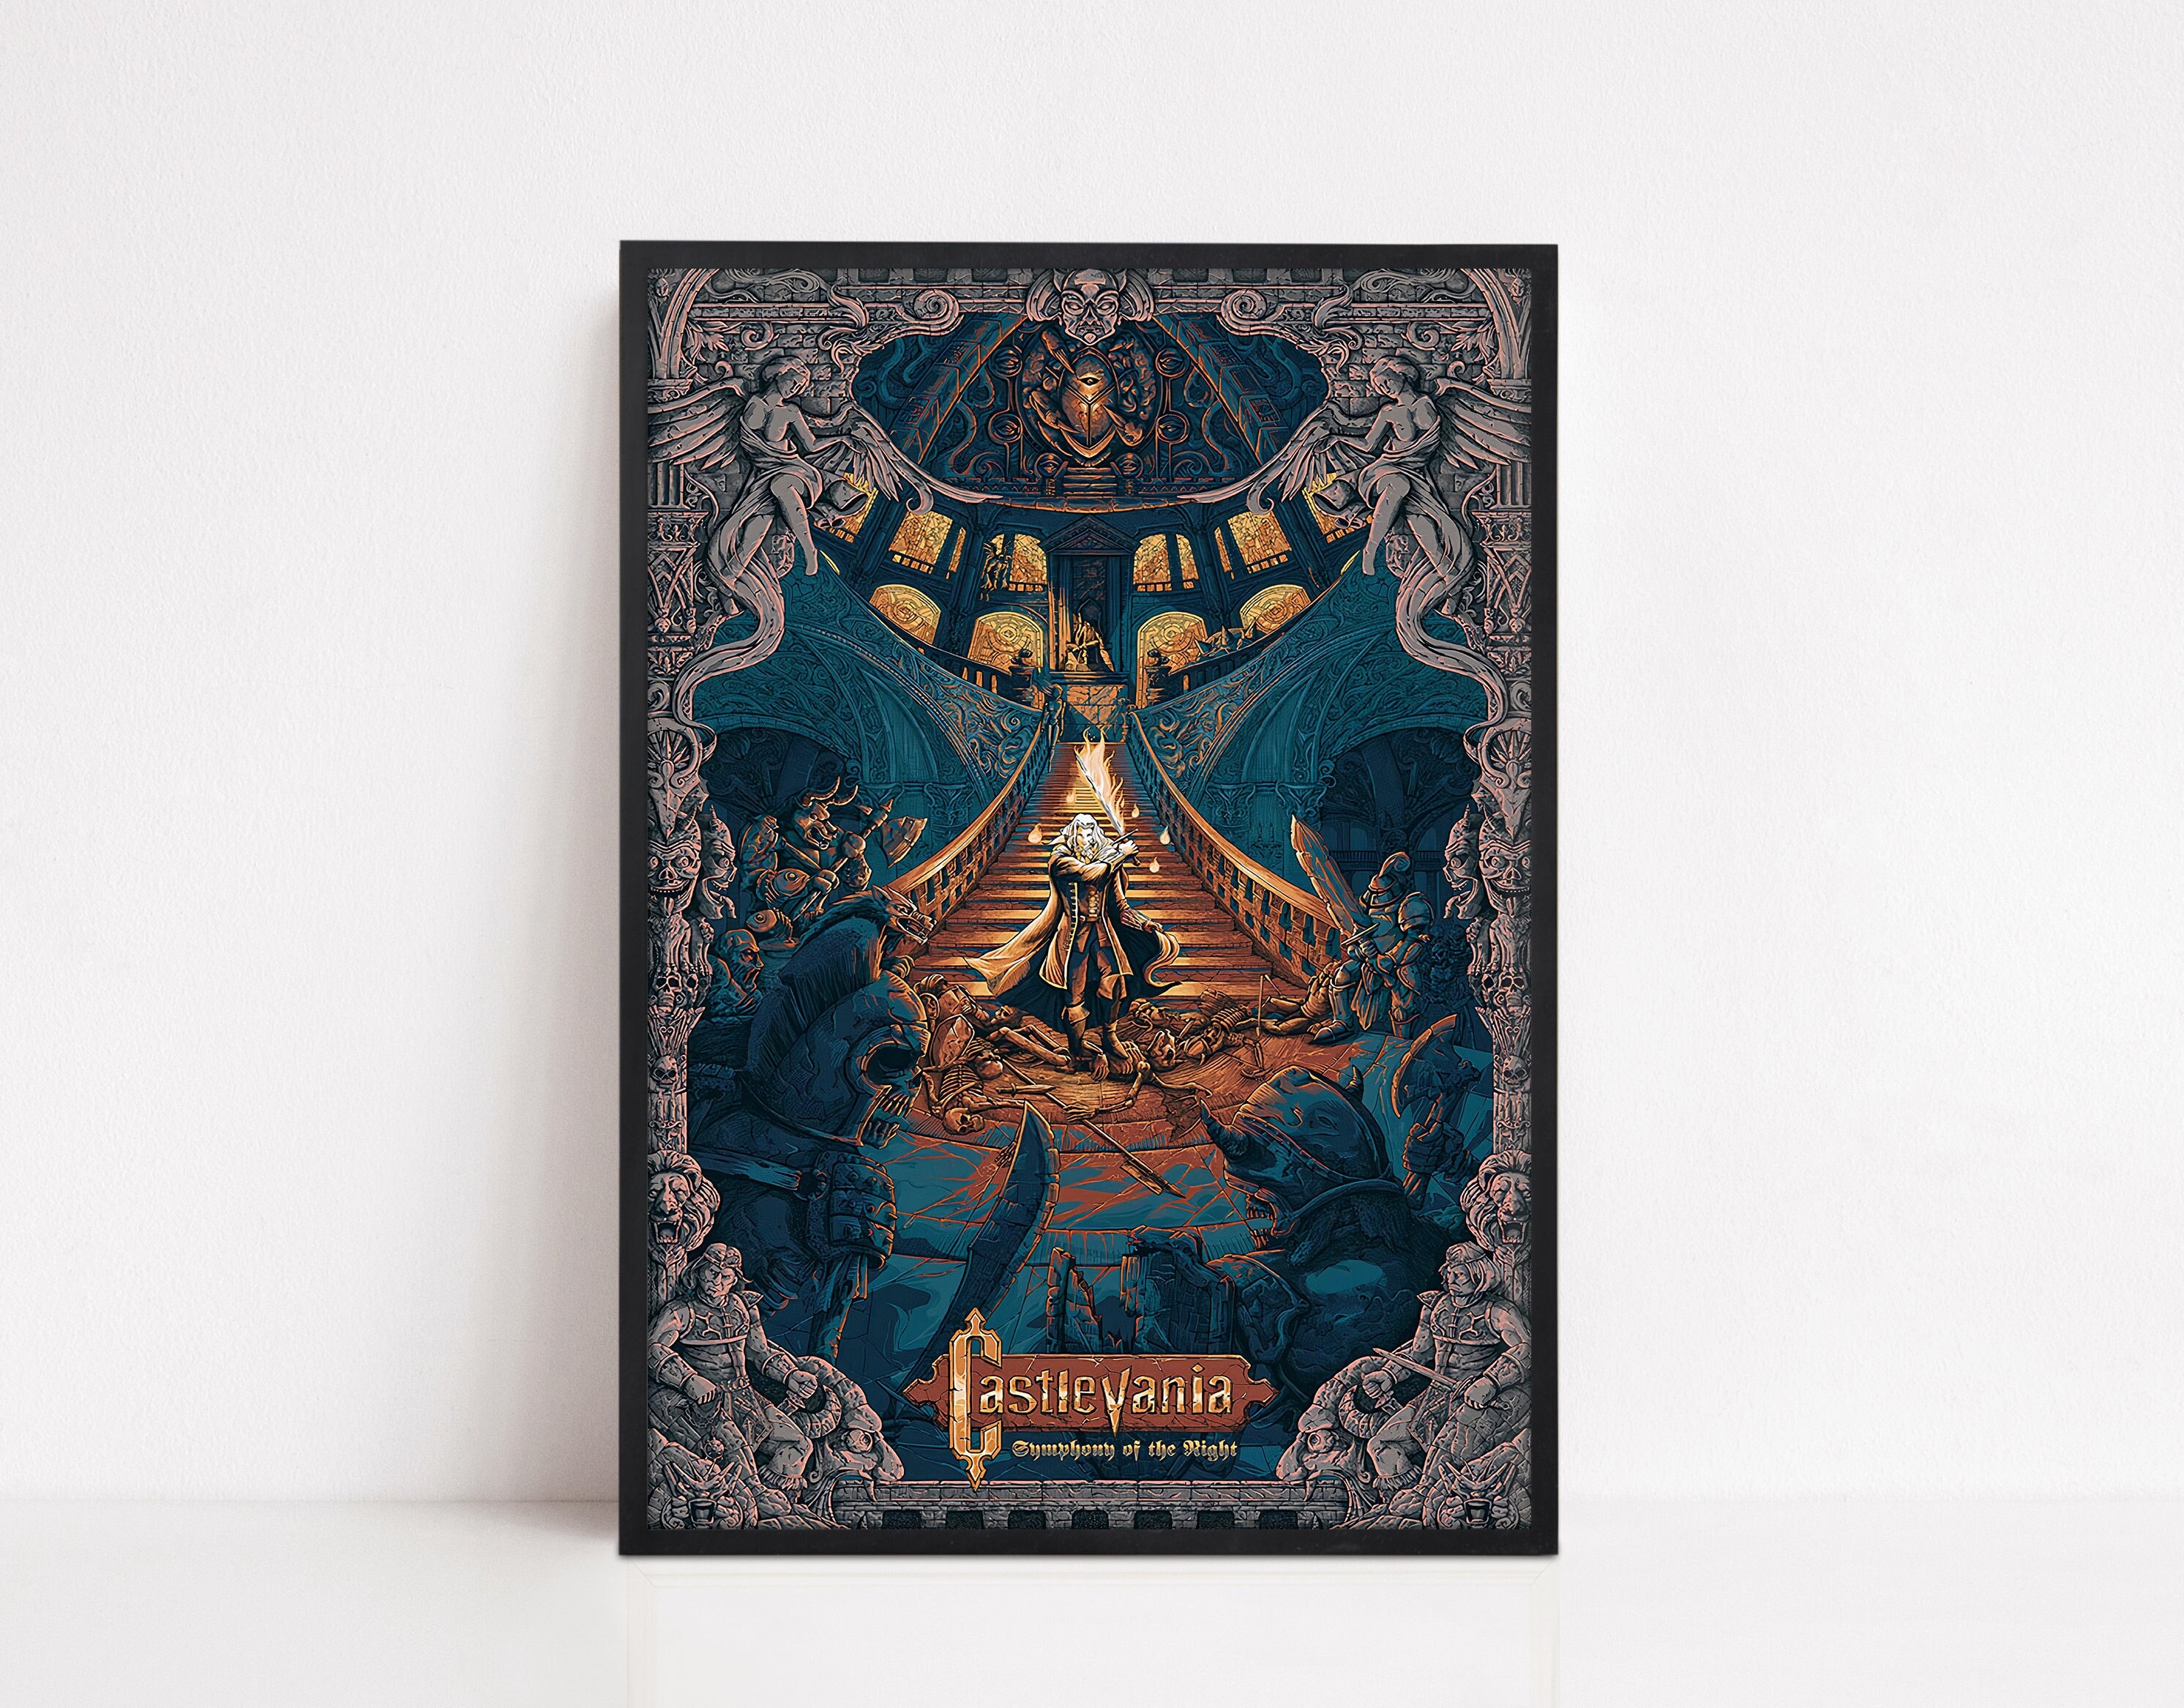 Castlevania Symphony of the Night Game Fabric Wall Scroll Poster (31x42)  Inches